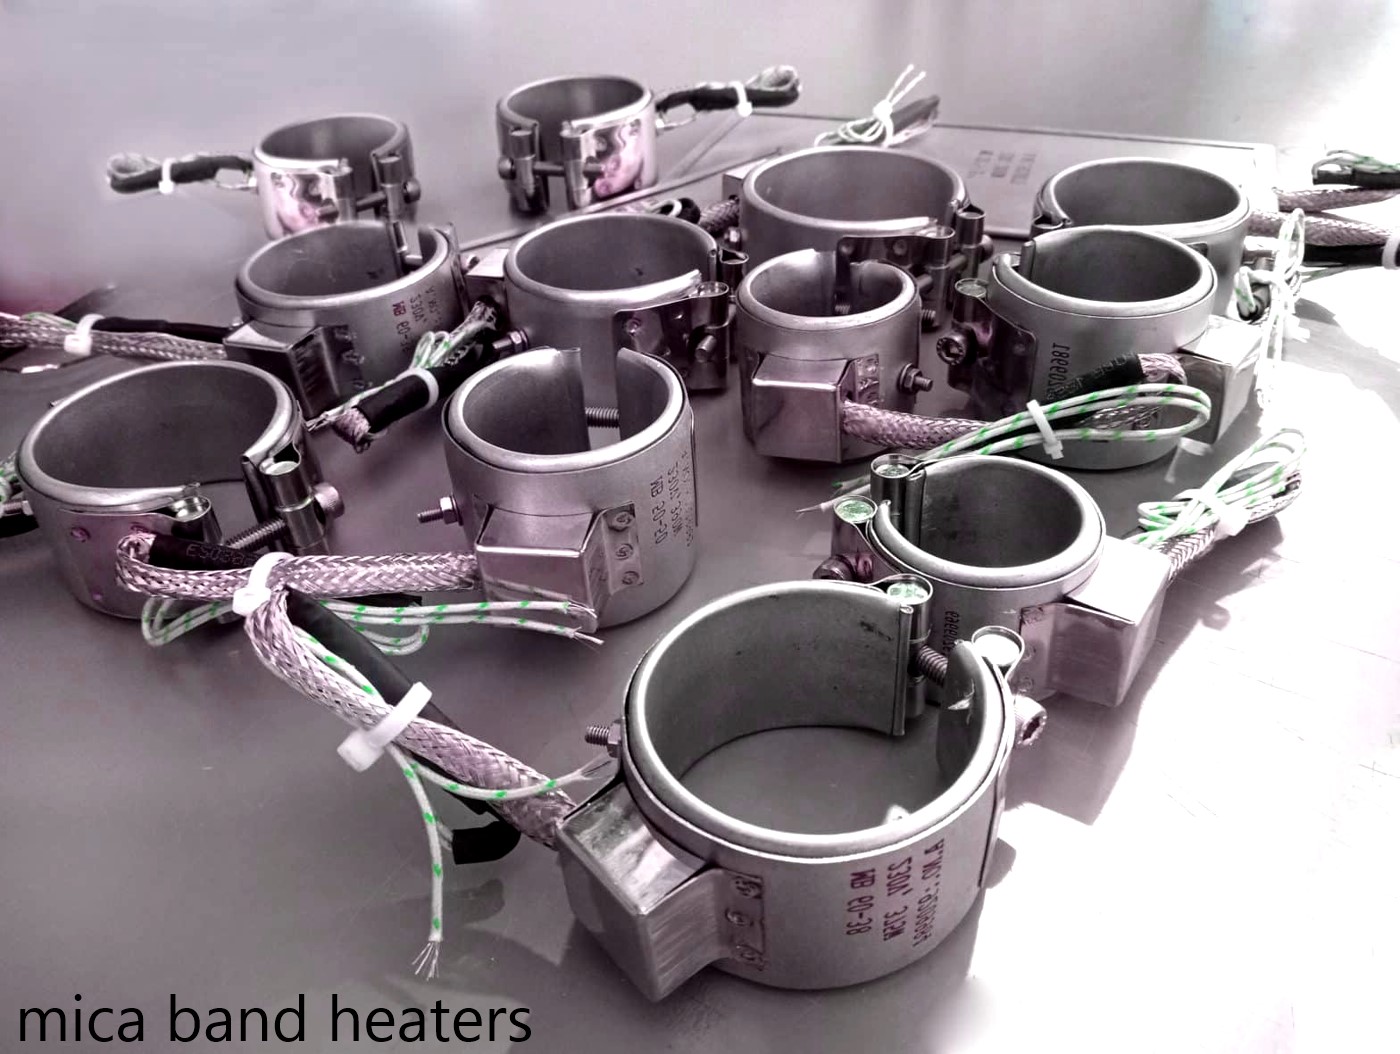 The Science Behind Mica Band Heaters and Their Applications